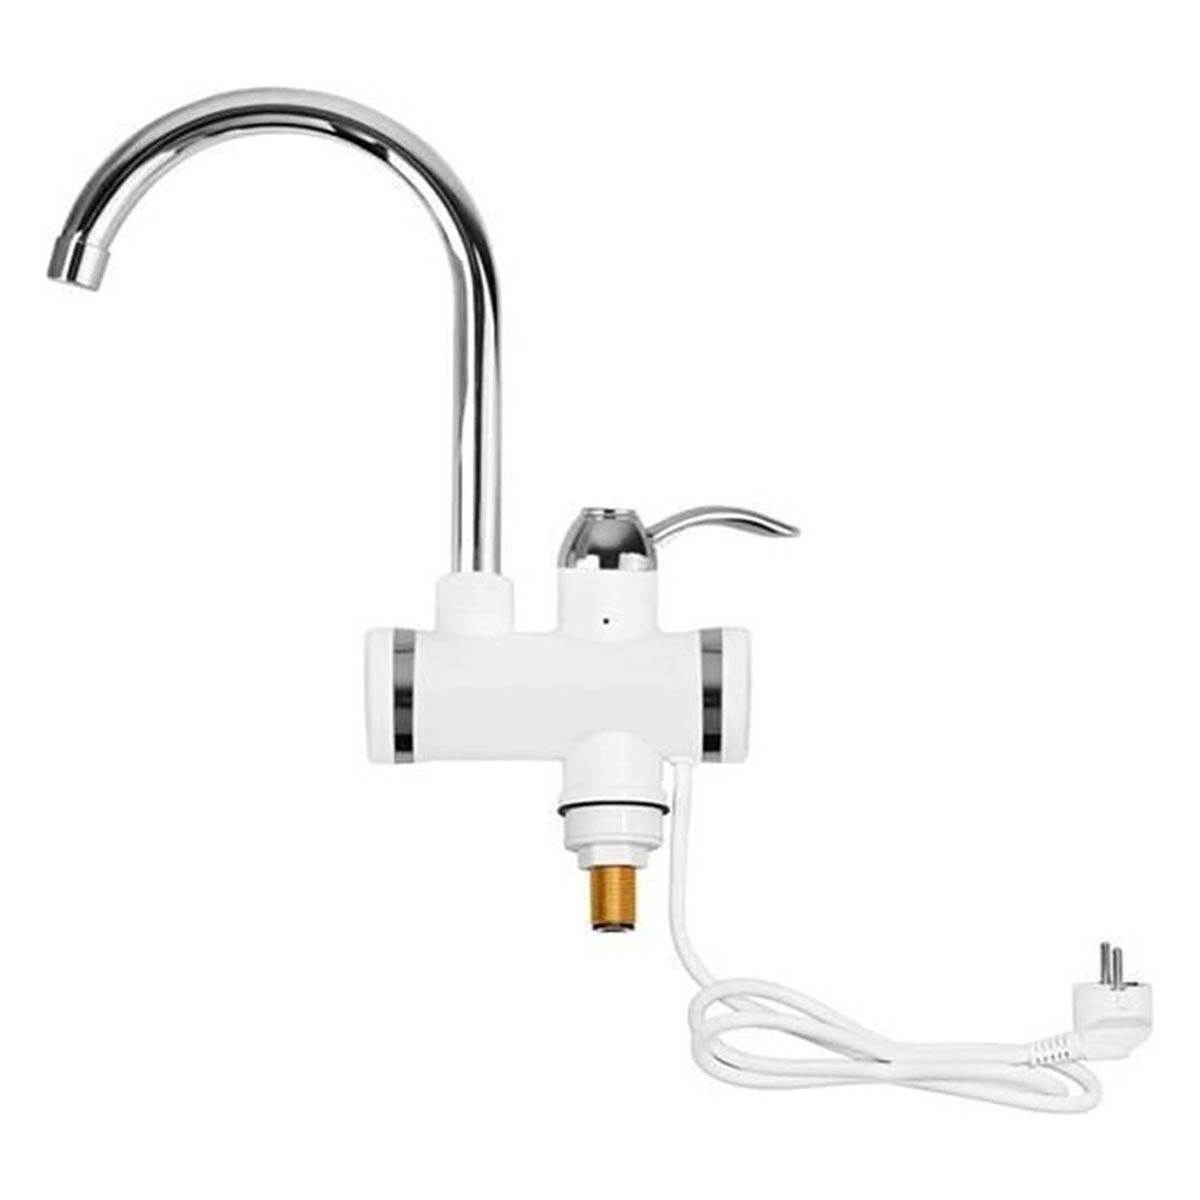 <tc>Ariko</tc> Electric Heated Tap - Electric Instant tap up to 60 °c - LCD Digital - Non Boiling Water - 3000W